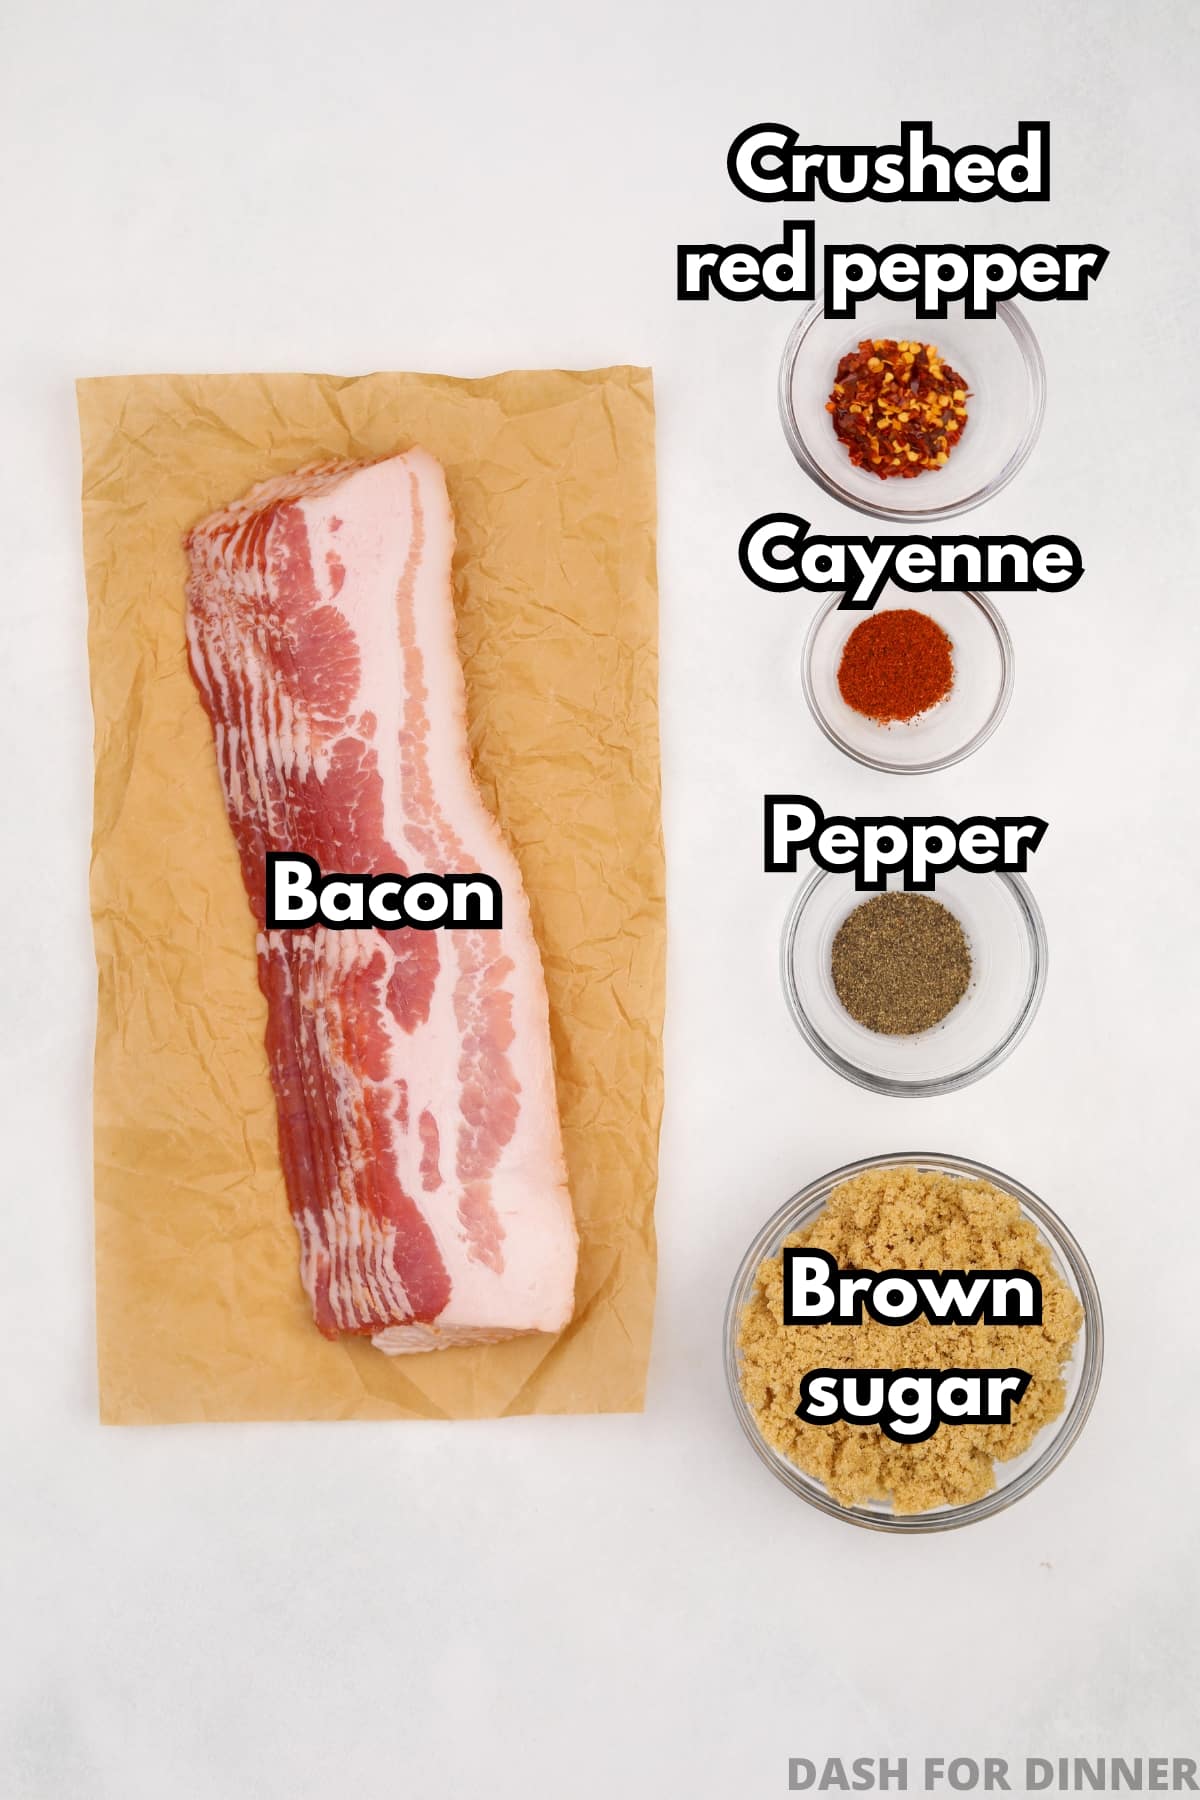 The ingredients you need to make millionaire bacon: bacon, brown sugar, pepper, cayenne, and crushed red pepper.